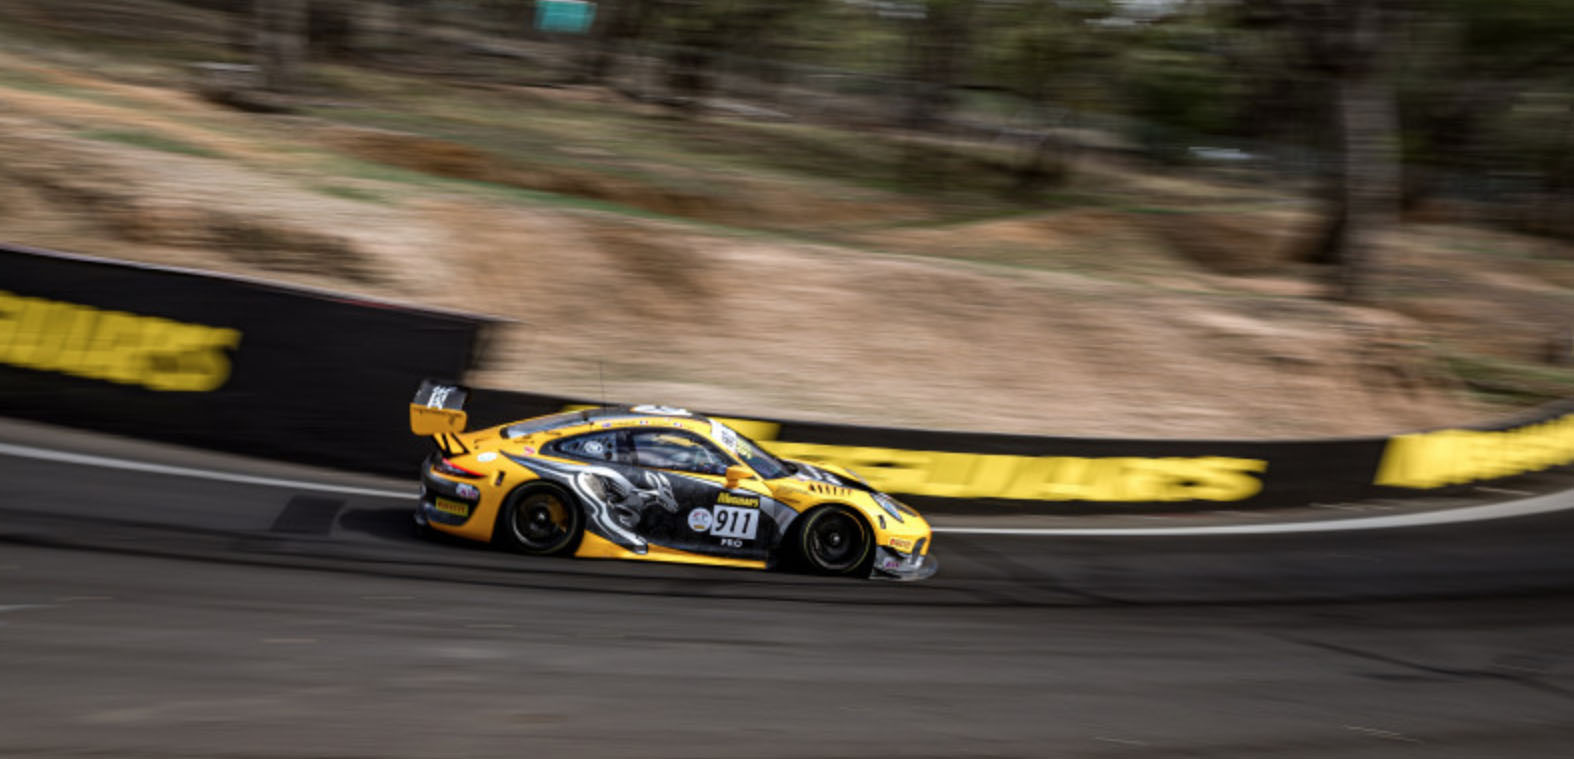 IGTC a Bathurst - Qualifiche <br />Campbell in pole, Ghiotto ko